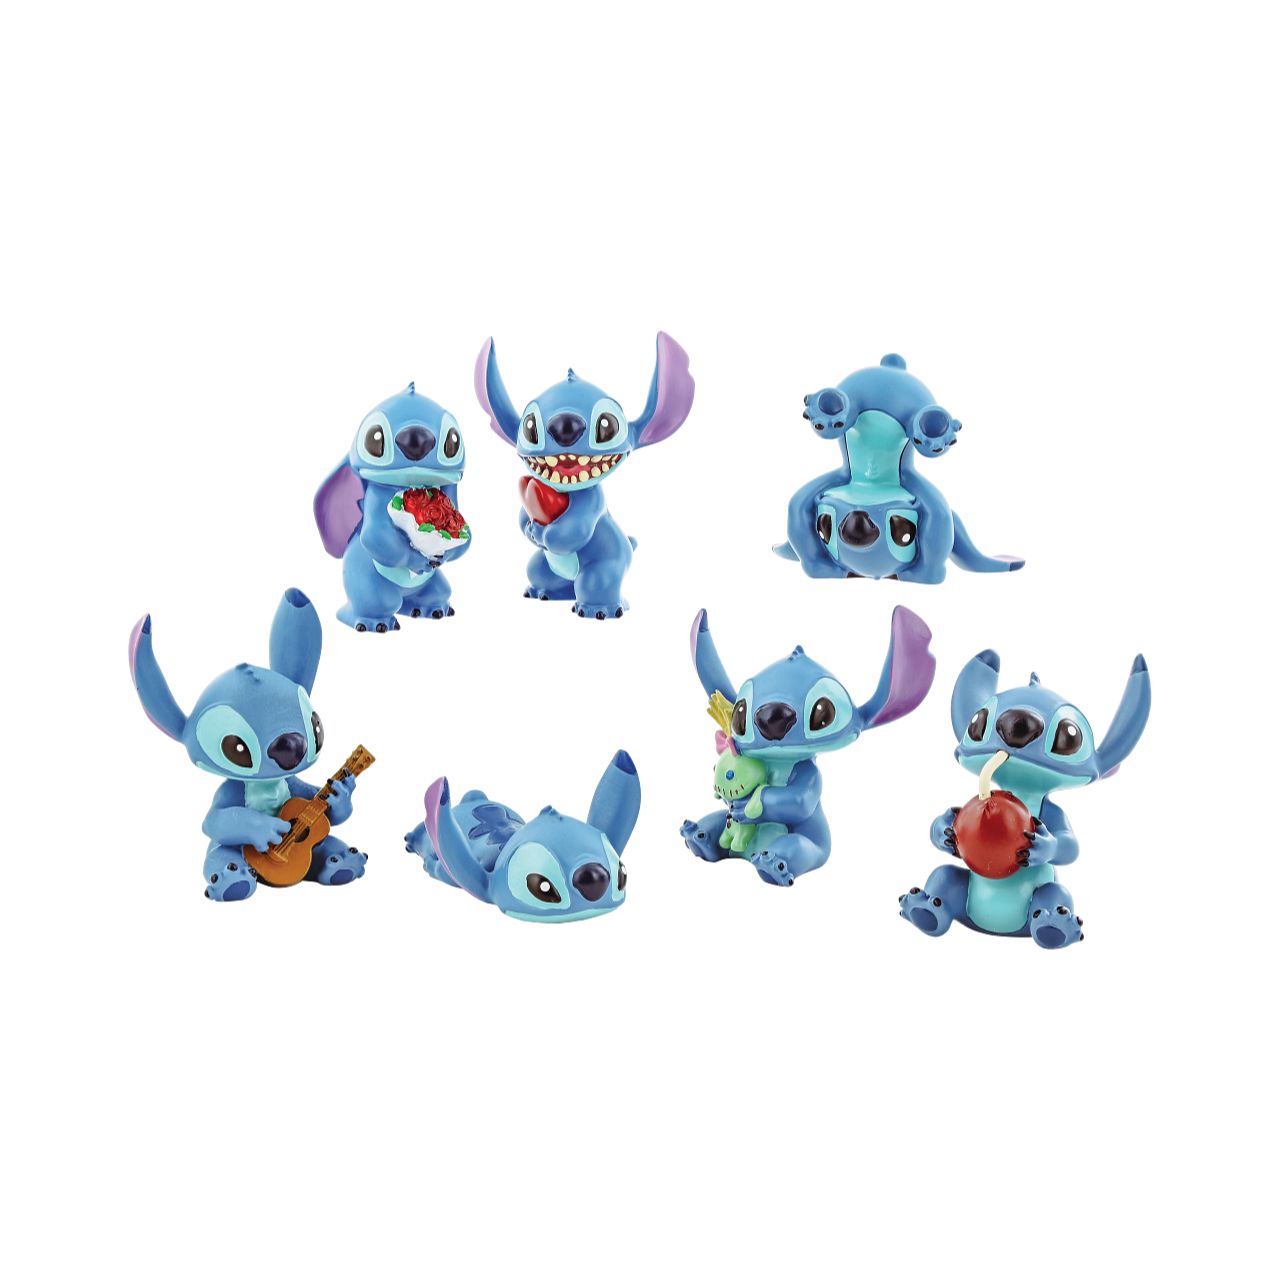 Stitch Guitar Figurine Disney Showcase  Here to play you your favourite tune, Lilo's best friend Stitch will turn any frown upside down. With perked ears and a sweet smile, this little guy will help your mind drift away to Hawaiian paradise.